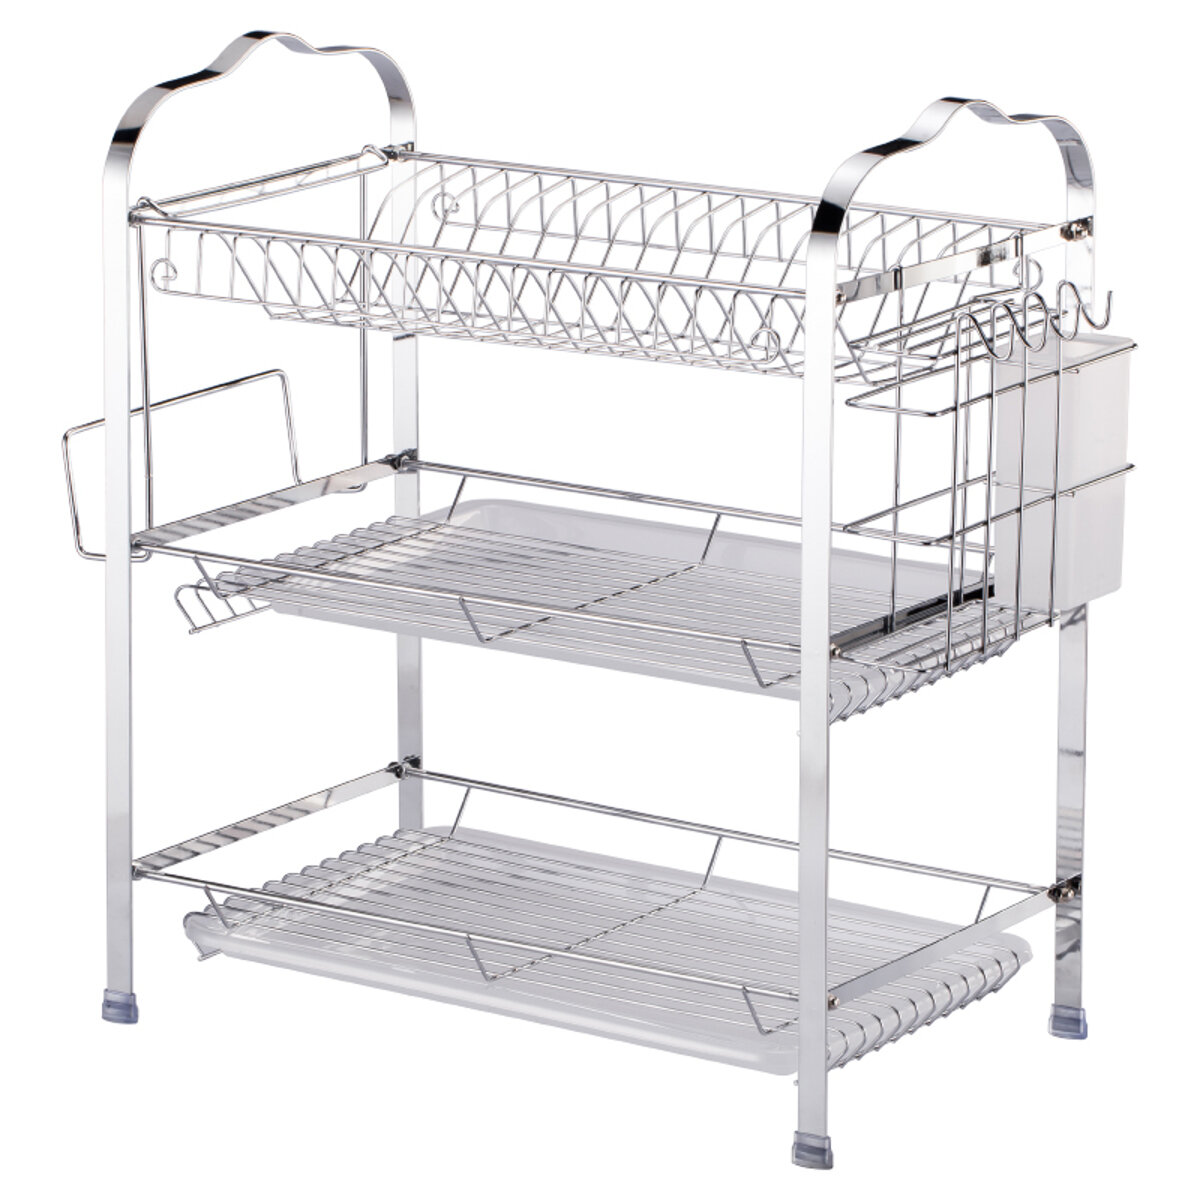 3 Layer Tier Chrome Alloy Dish Drainer Cutlery Holder Rack Drip Tray Kitchen